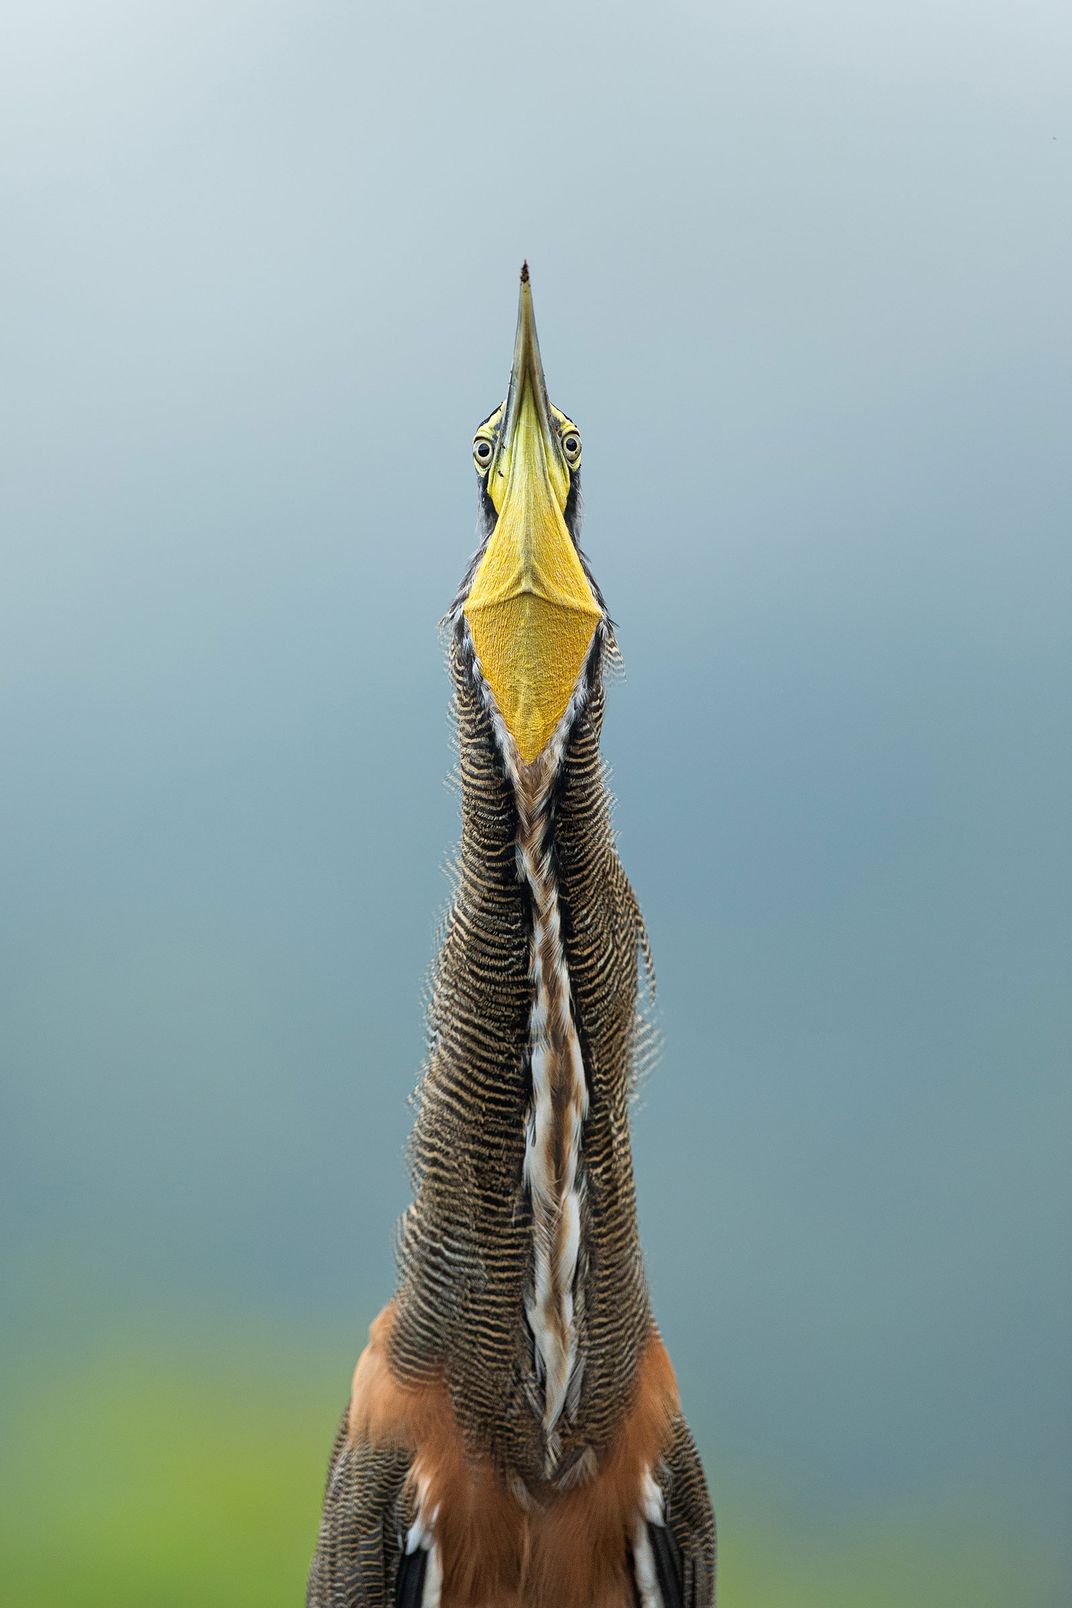 A Bare-throated Tiger-Heron stares down the photographer head-on, giving a full view of its long neck